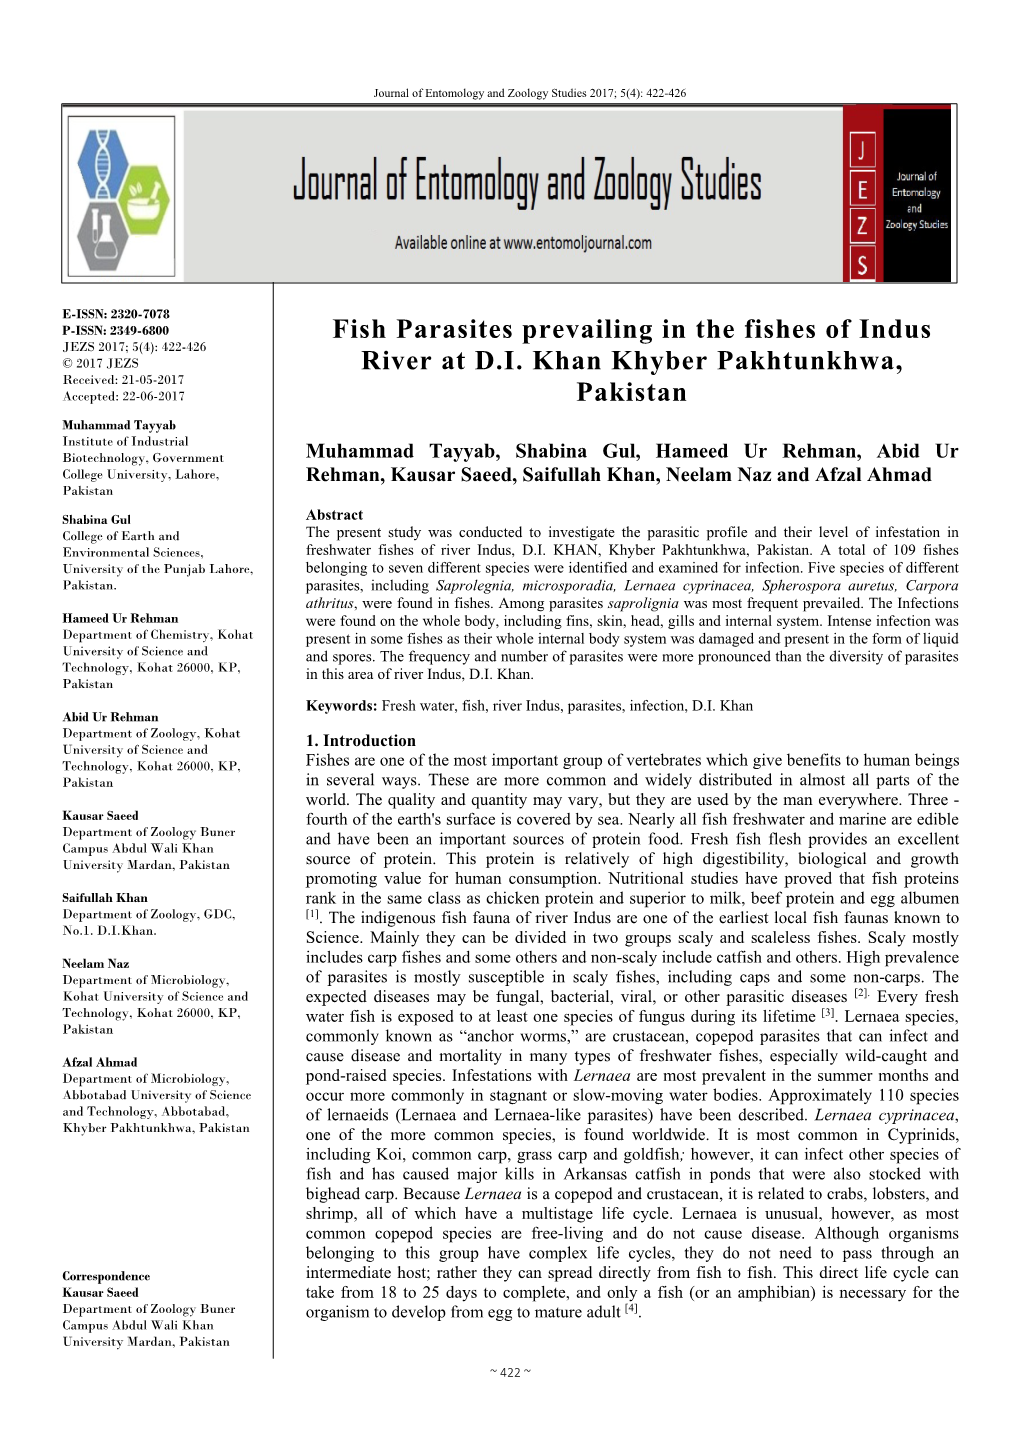 Fish Parasites Prevailing in the Fishes of Indus River at D.I. Khan Khyber